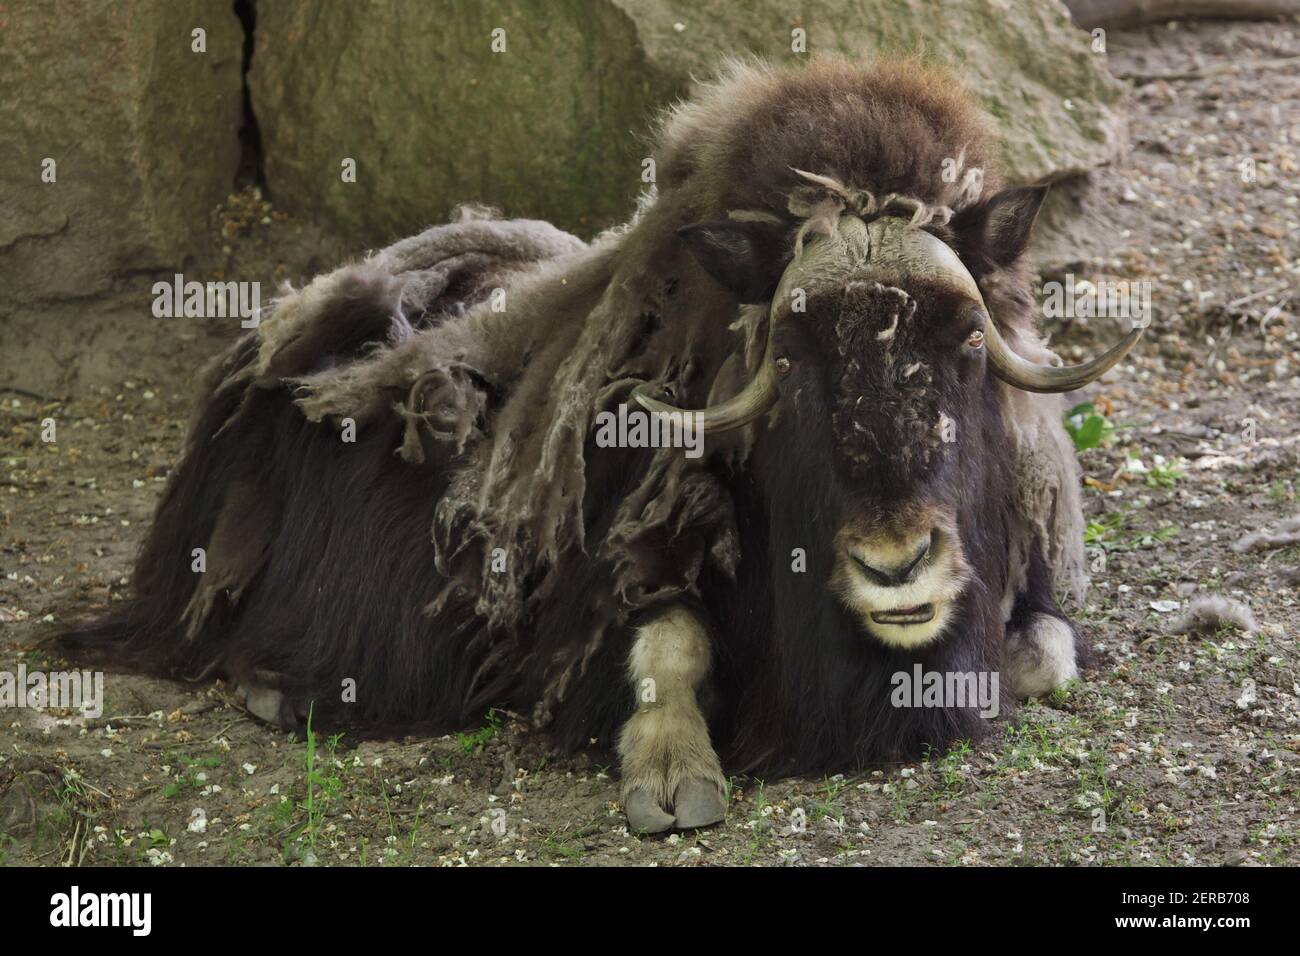 Alaska musk ox (Ovibos moschatus moschatus), also known as the Canadian muskox. Stock Photo